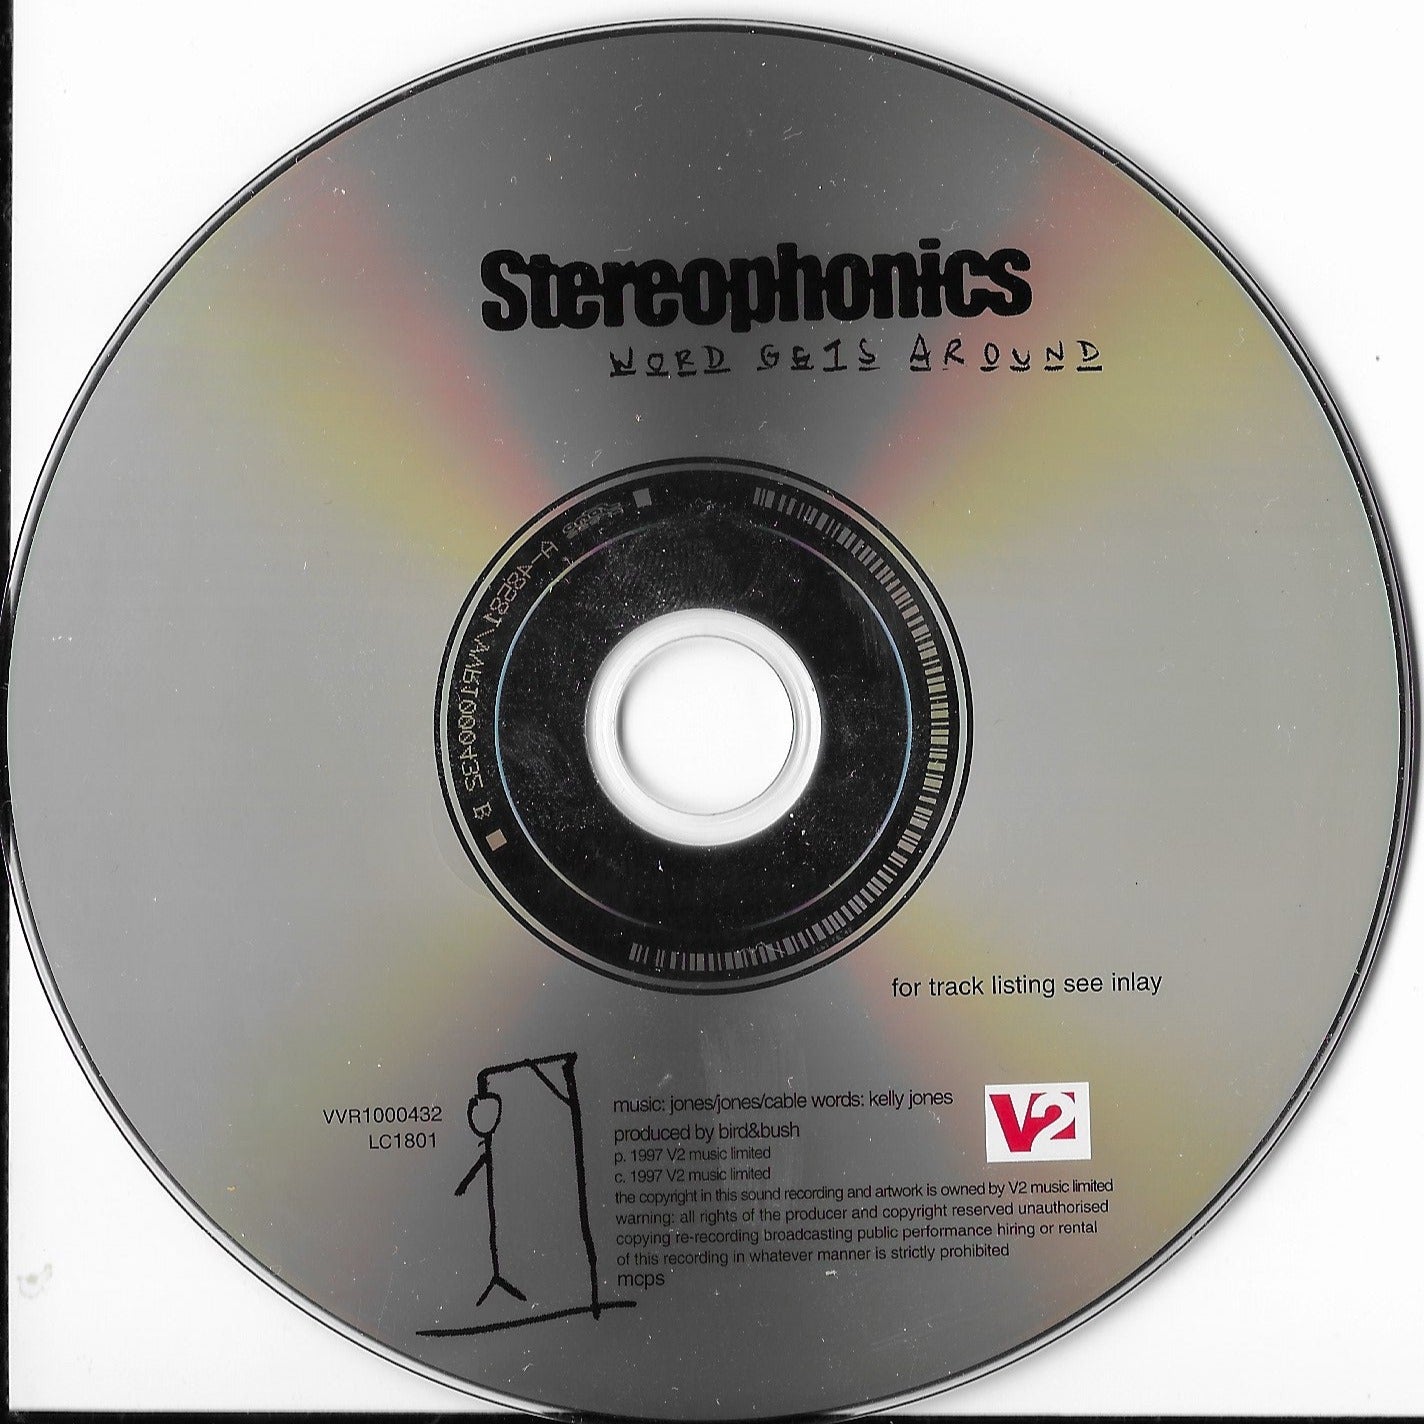 STEREOPHONICS - Word Gets Around